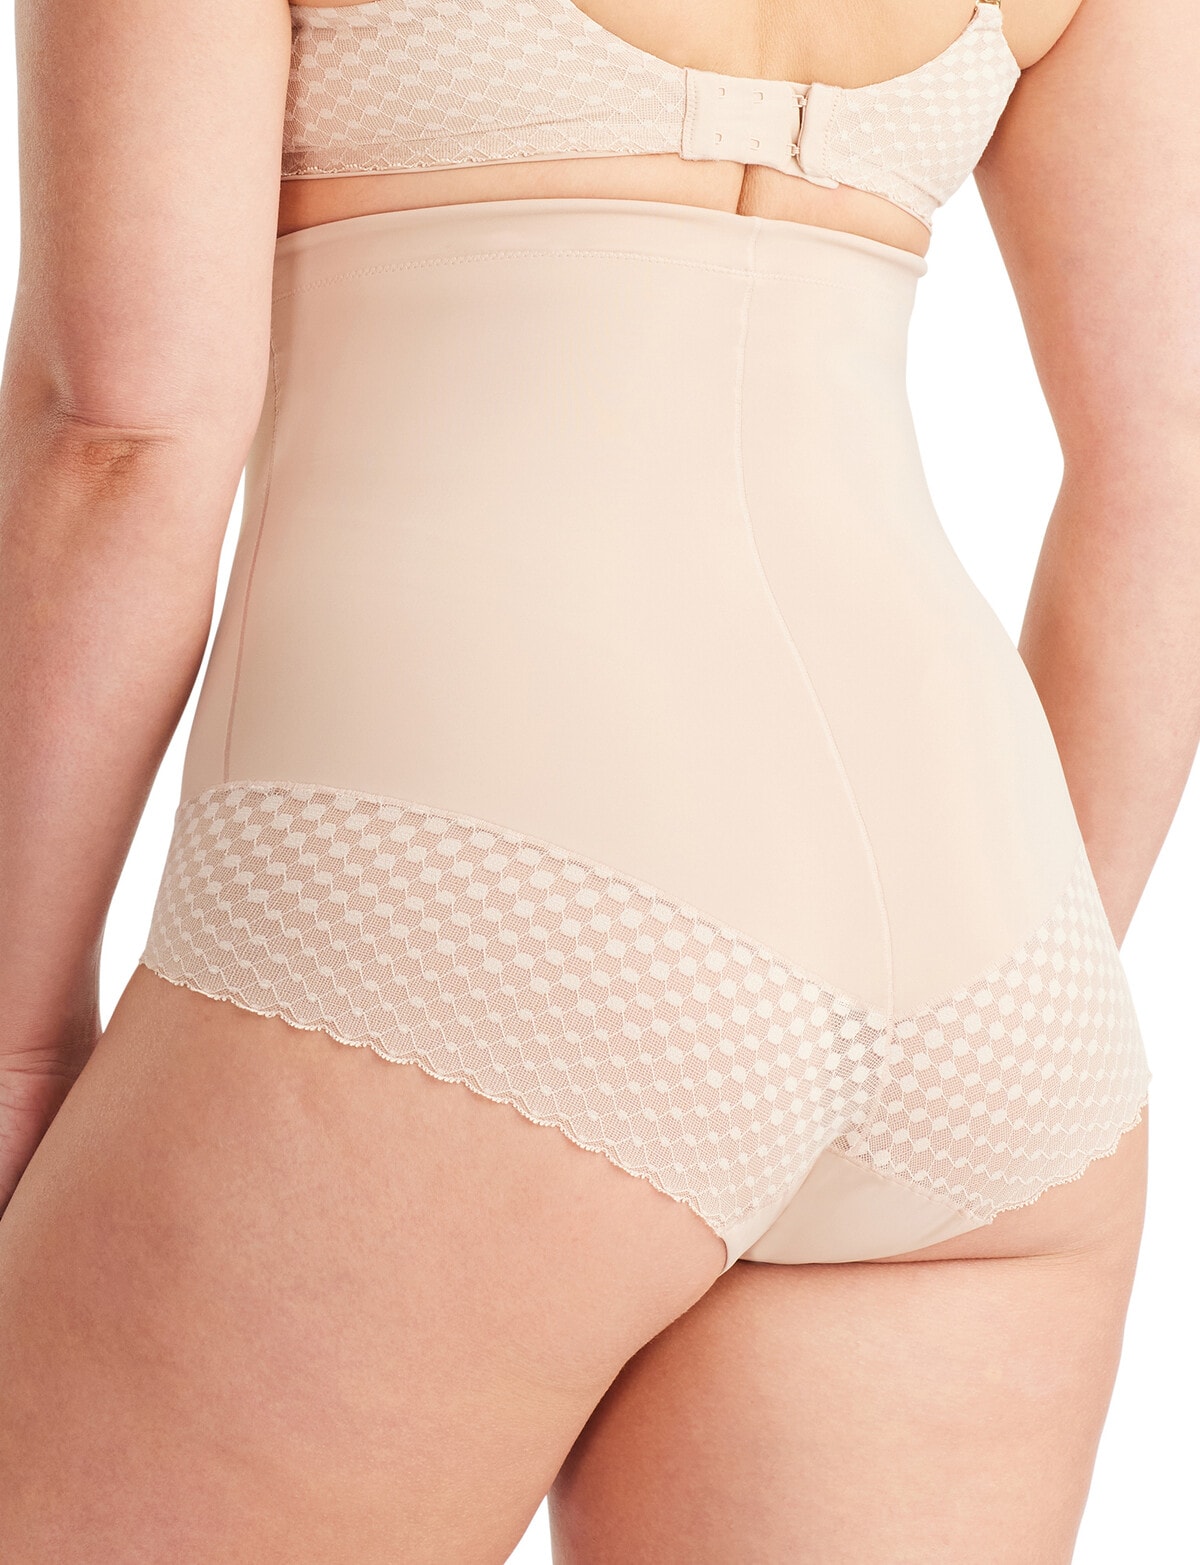 Farmers  Nancy Ganz Revive Lace High Waist Brief, Taupe - PriceGrabber